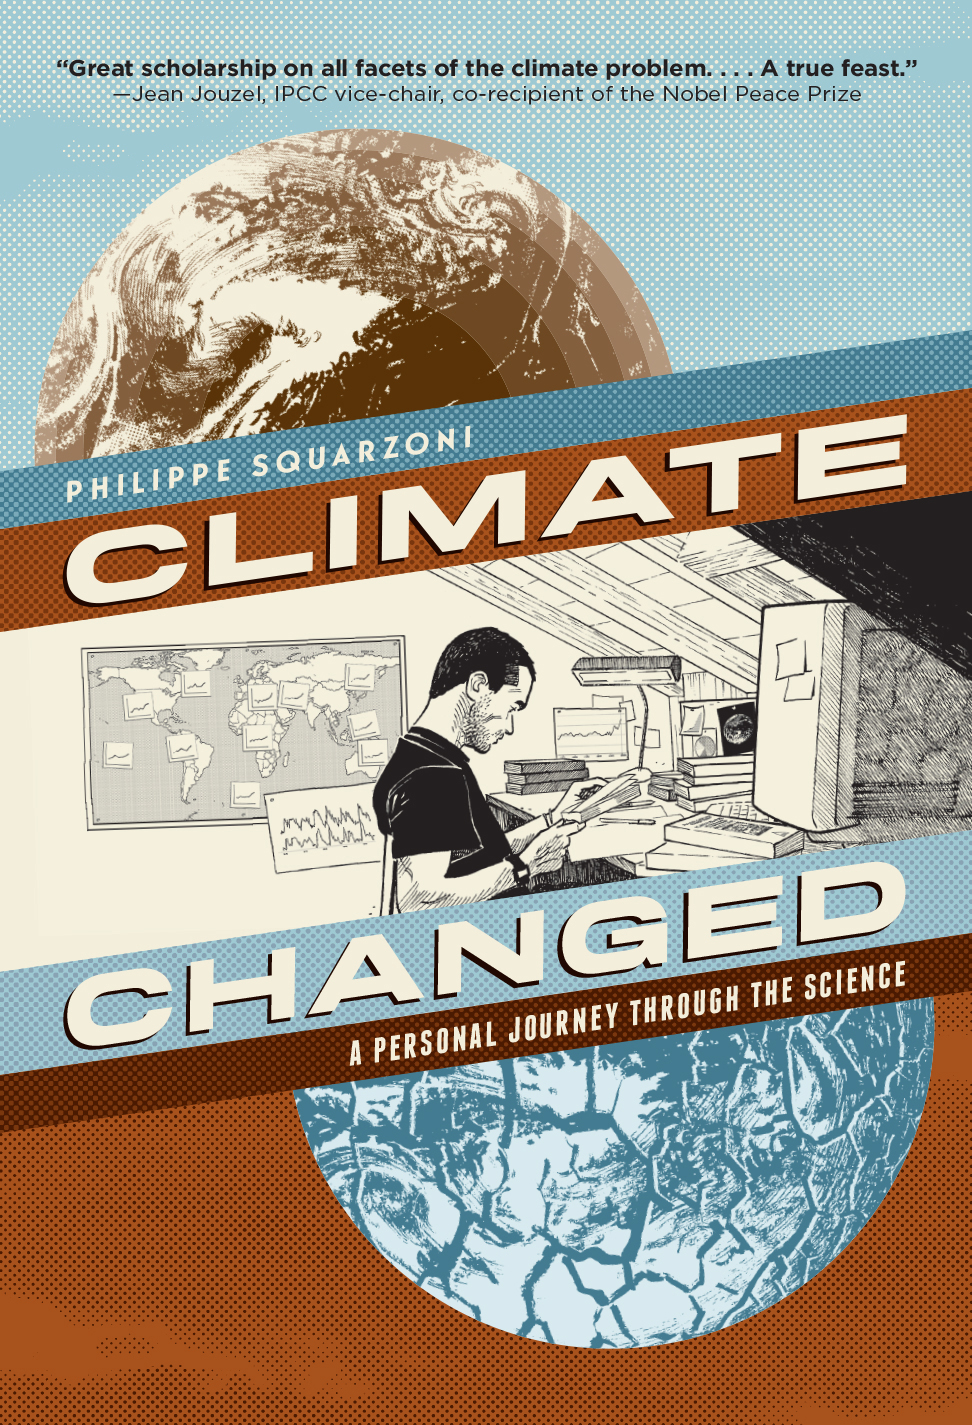 Climate Changed, by Philippe Squarzoni